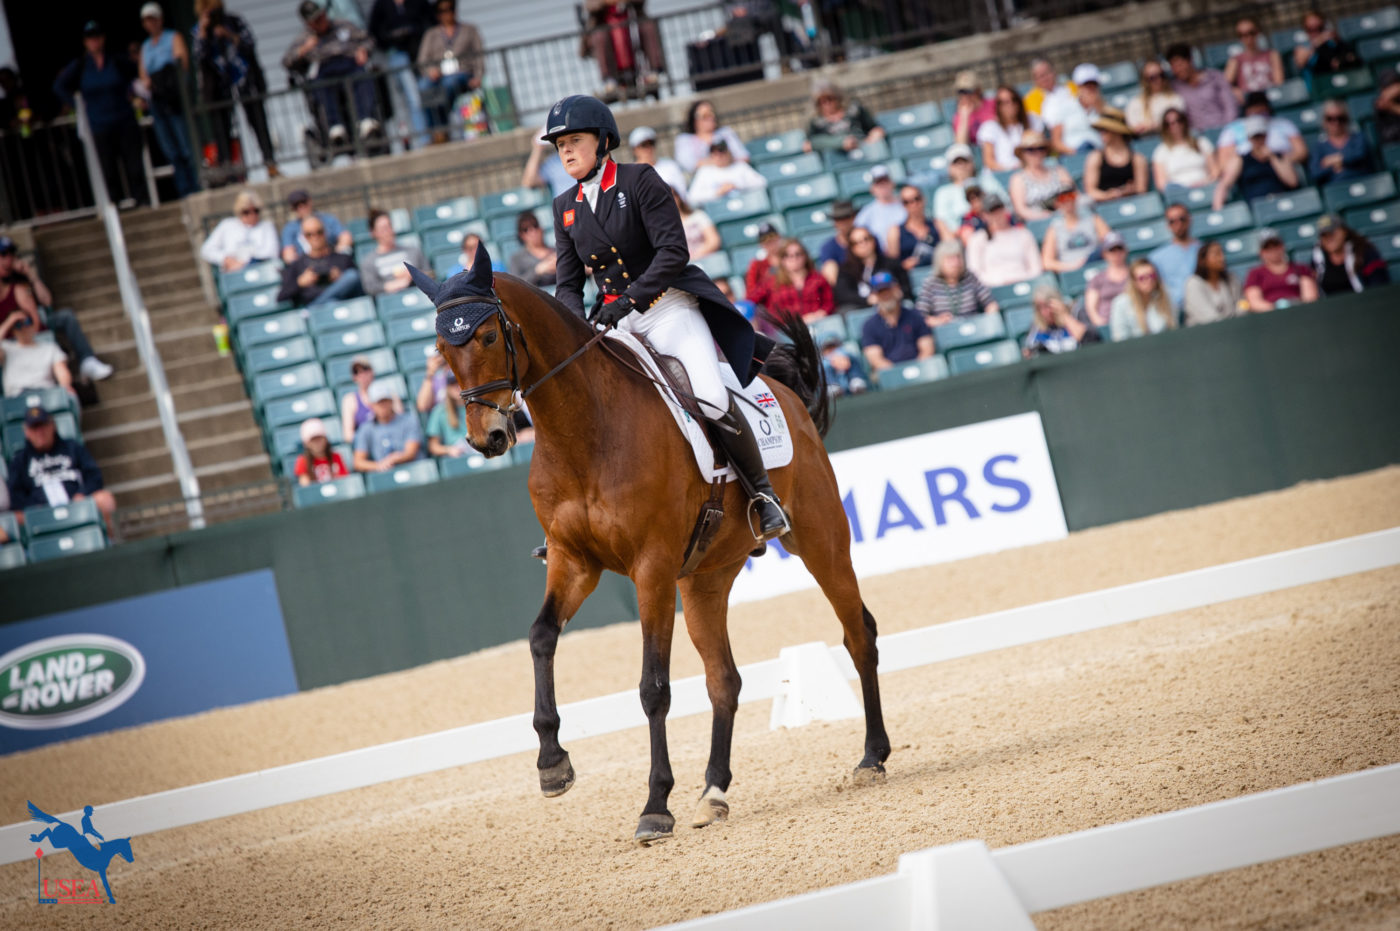 Rolex Grand Slam winner Pippa Funnell holds onto fifth with Maybach. USEA/Meagan DeLisle photo